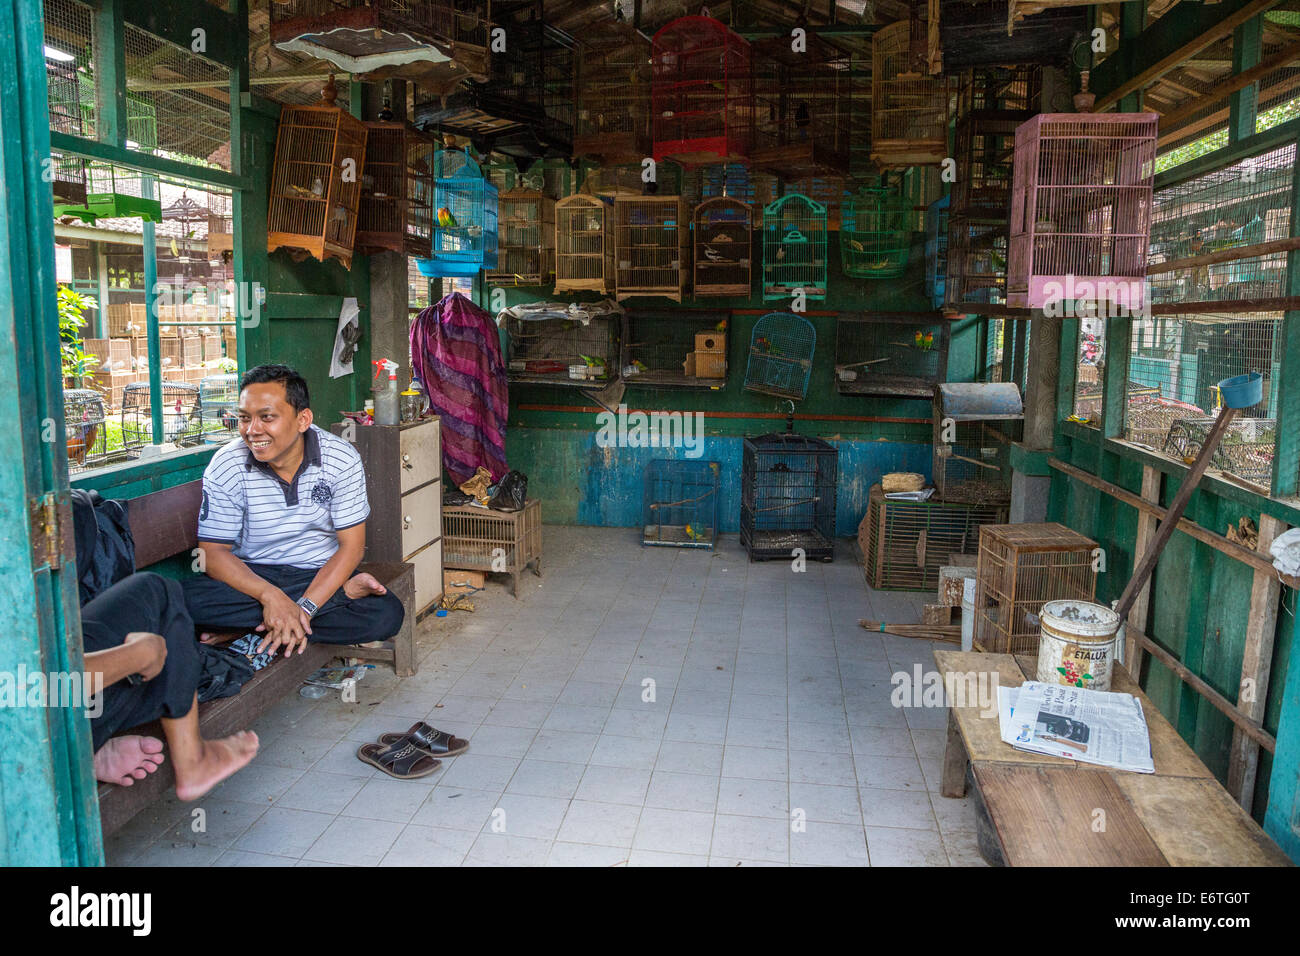 Yogyakarta, Java, Indonesia.  Two Men Conversing in a Shop Selling Caged Birds in the Bird Market. Stock Photo